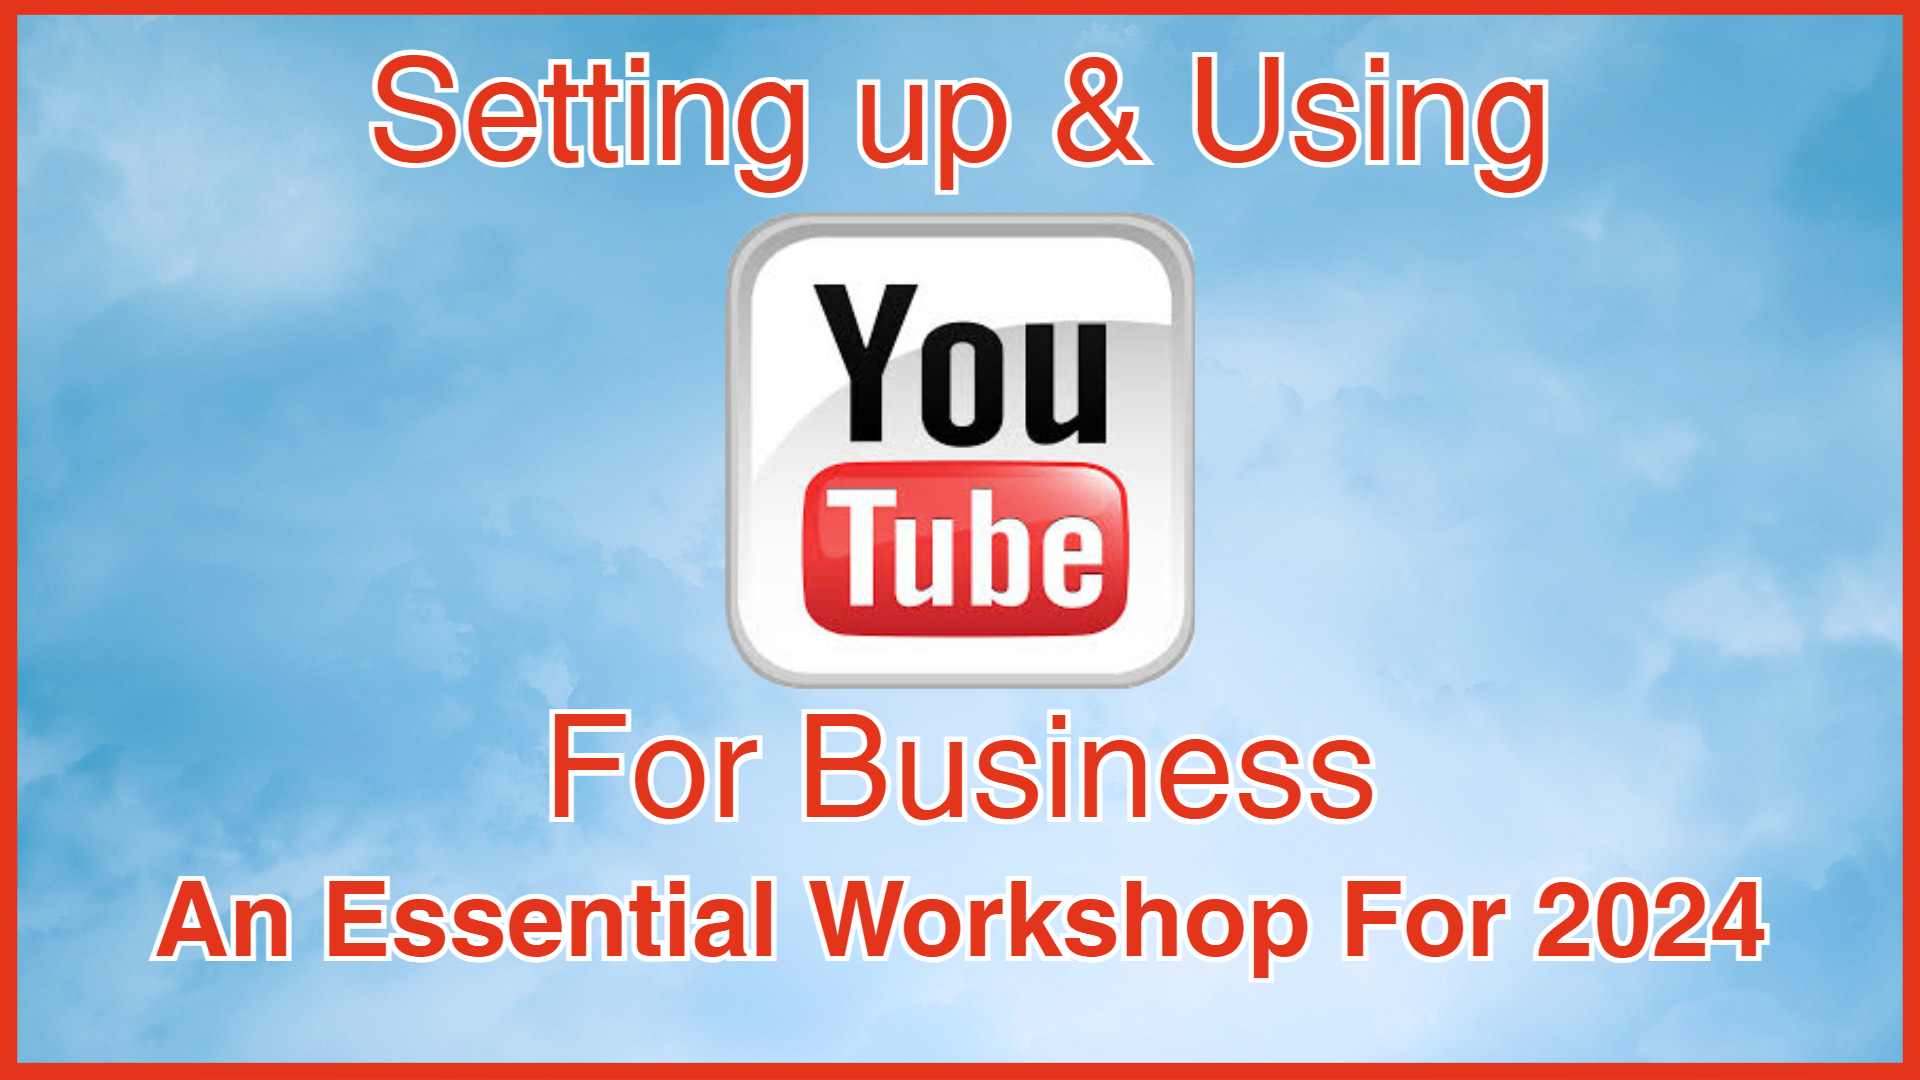 Using YouTube For Business (Interactive Workshop)